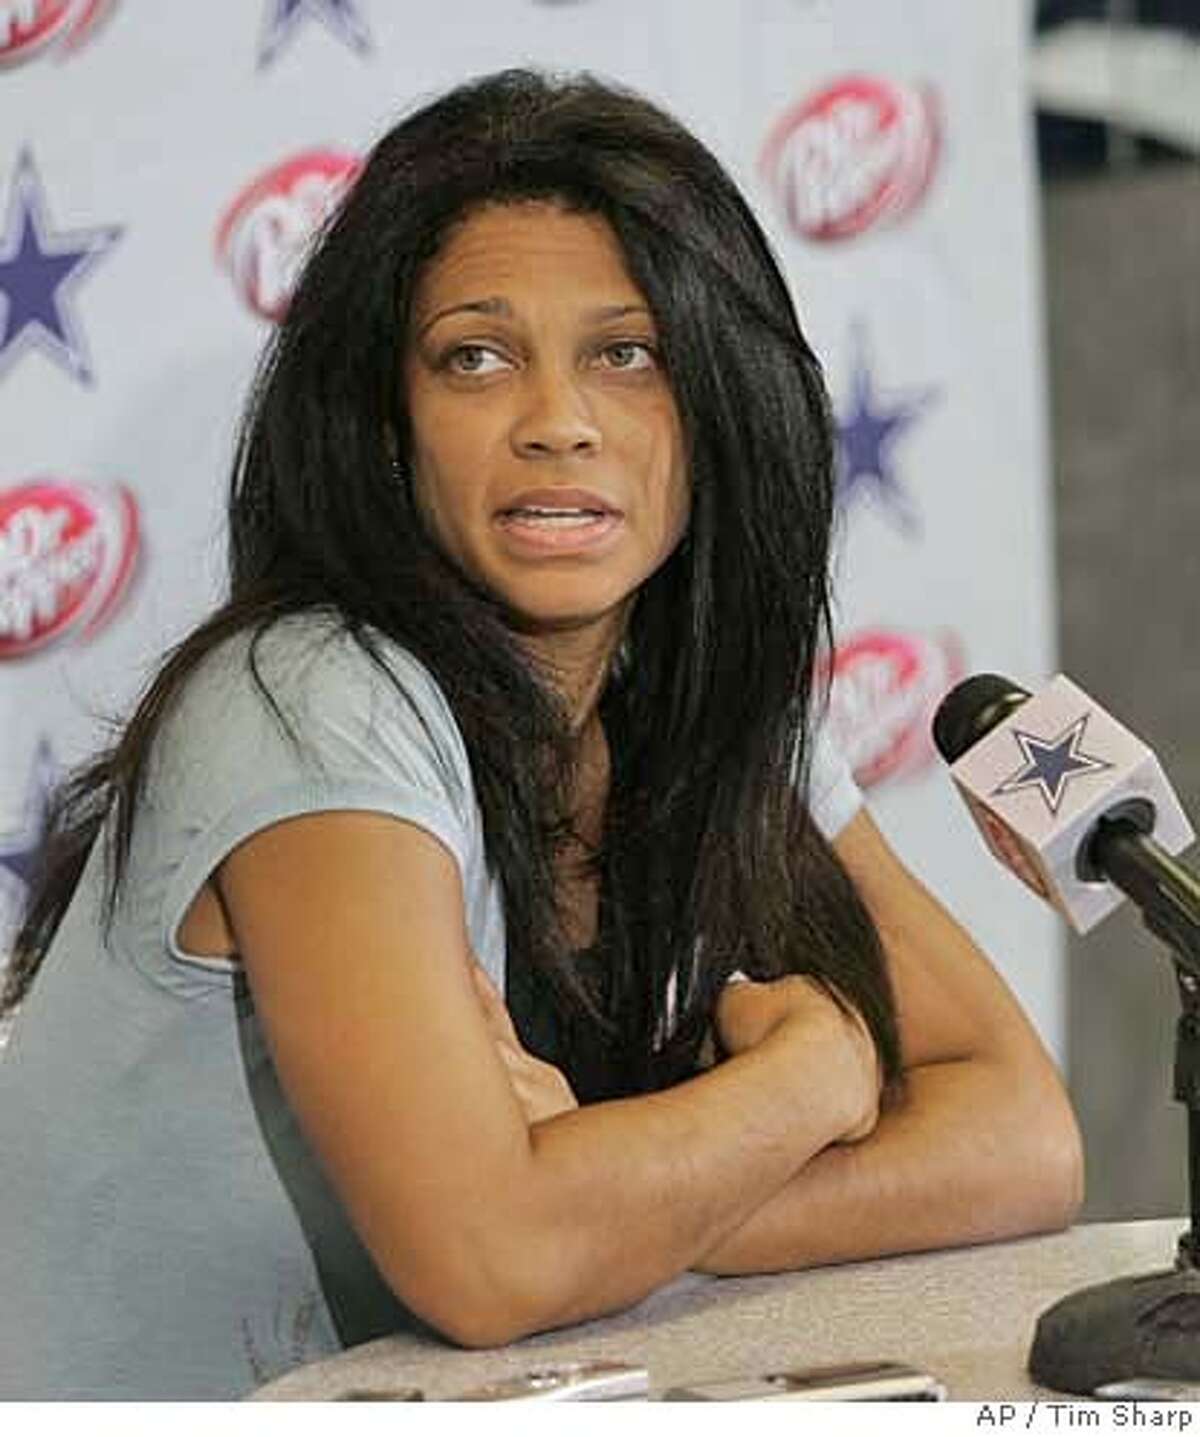 Kim Etheredge, publicist for Dallas Cowboys wide receiver Terrell Owens, responds to a question during a press conference at the Cowboys training facility in Irving, Texas, Wednesday, Sept. 27, 2006.(AP Photo/Tim Sharp)